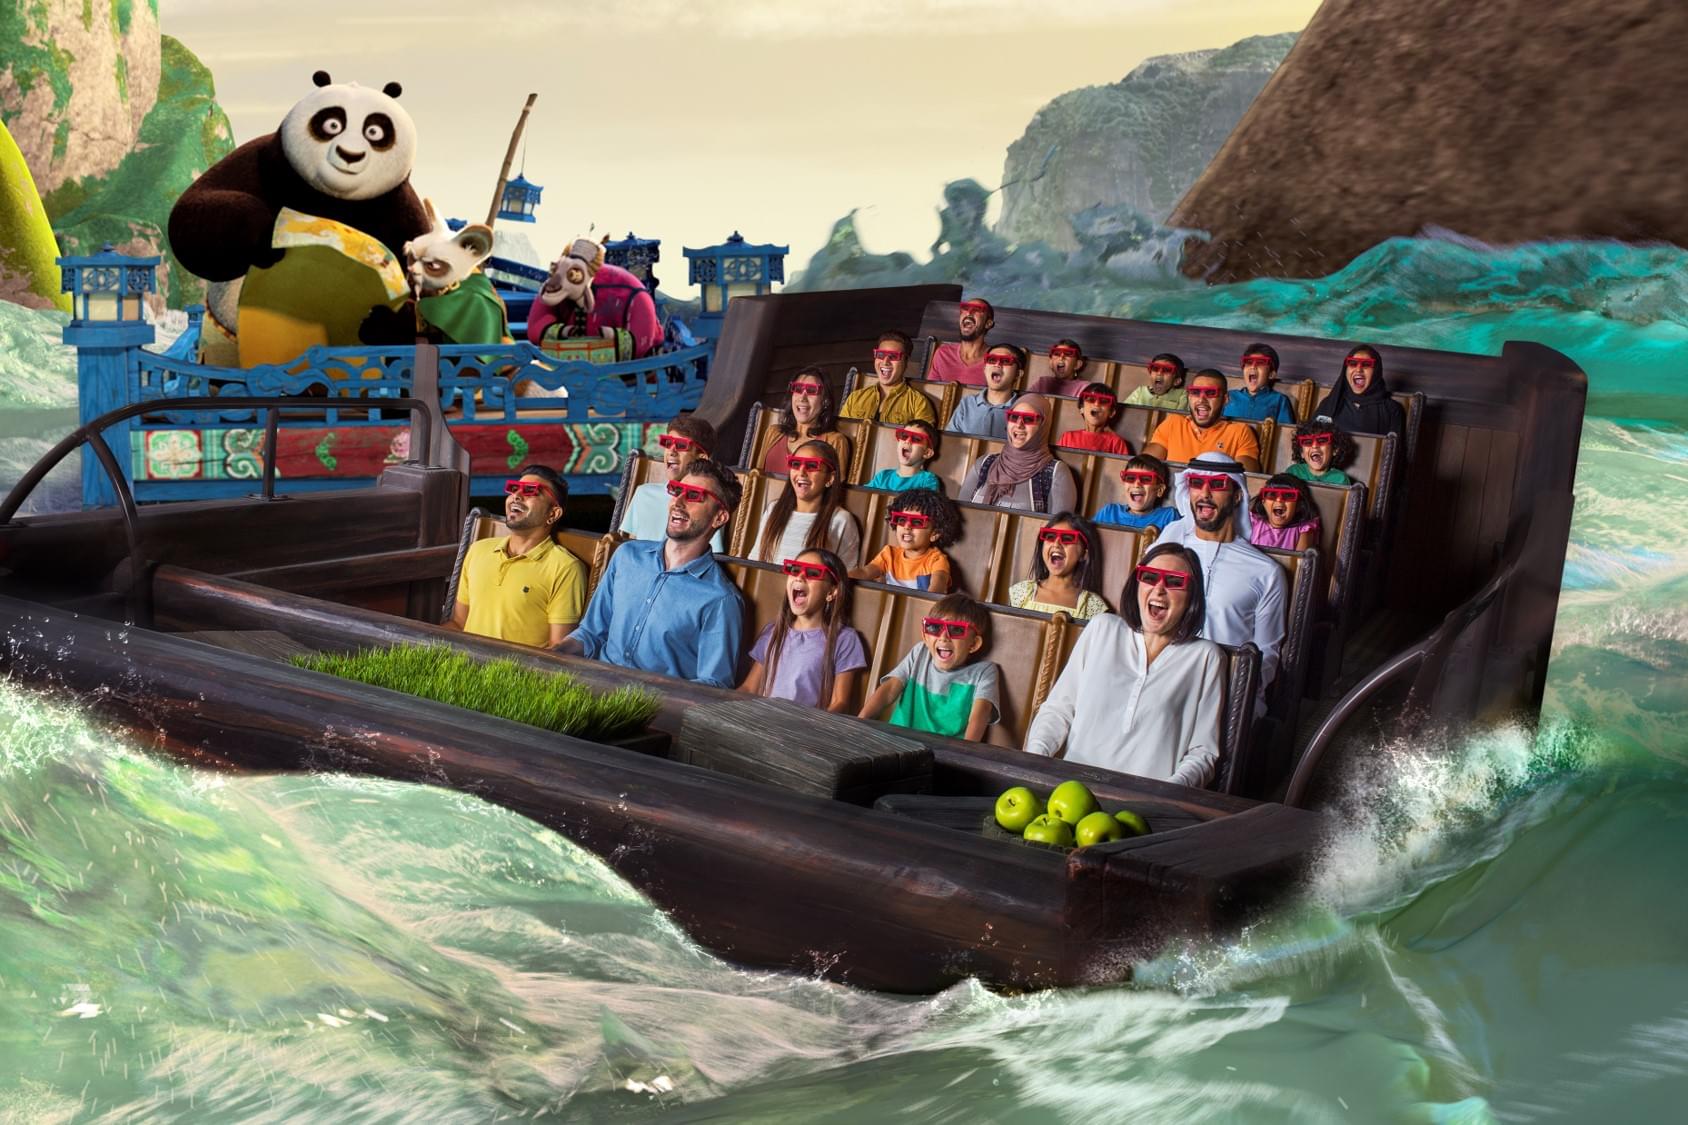 Get ready for a high-flying adventure with Po and friends on the thrilling Kung Fu Panda ride